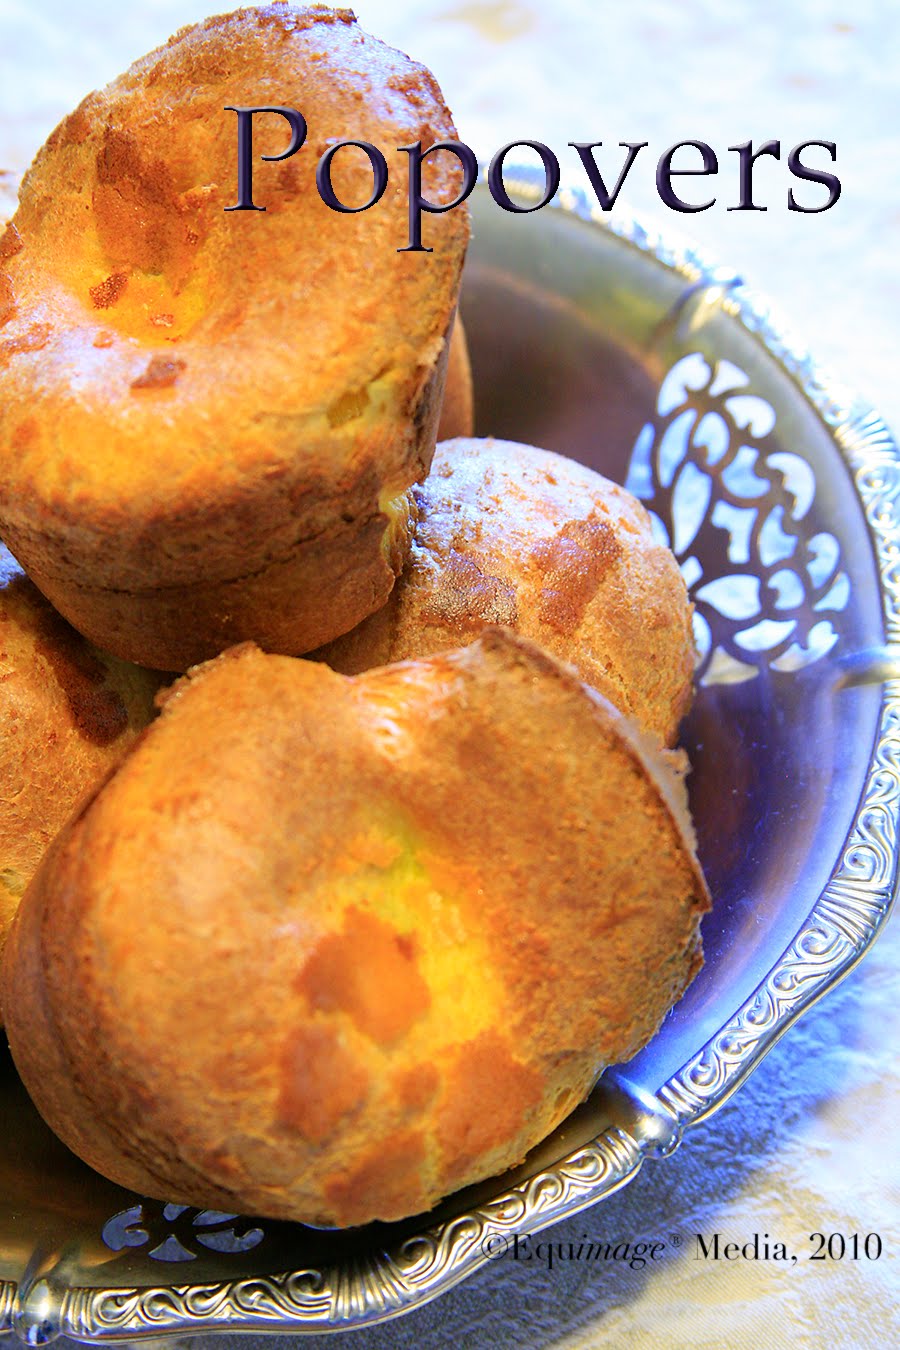 tasting out loud: Popovers!